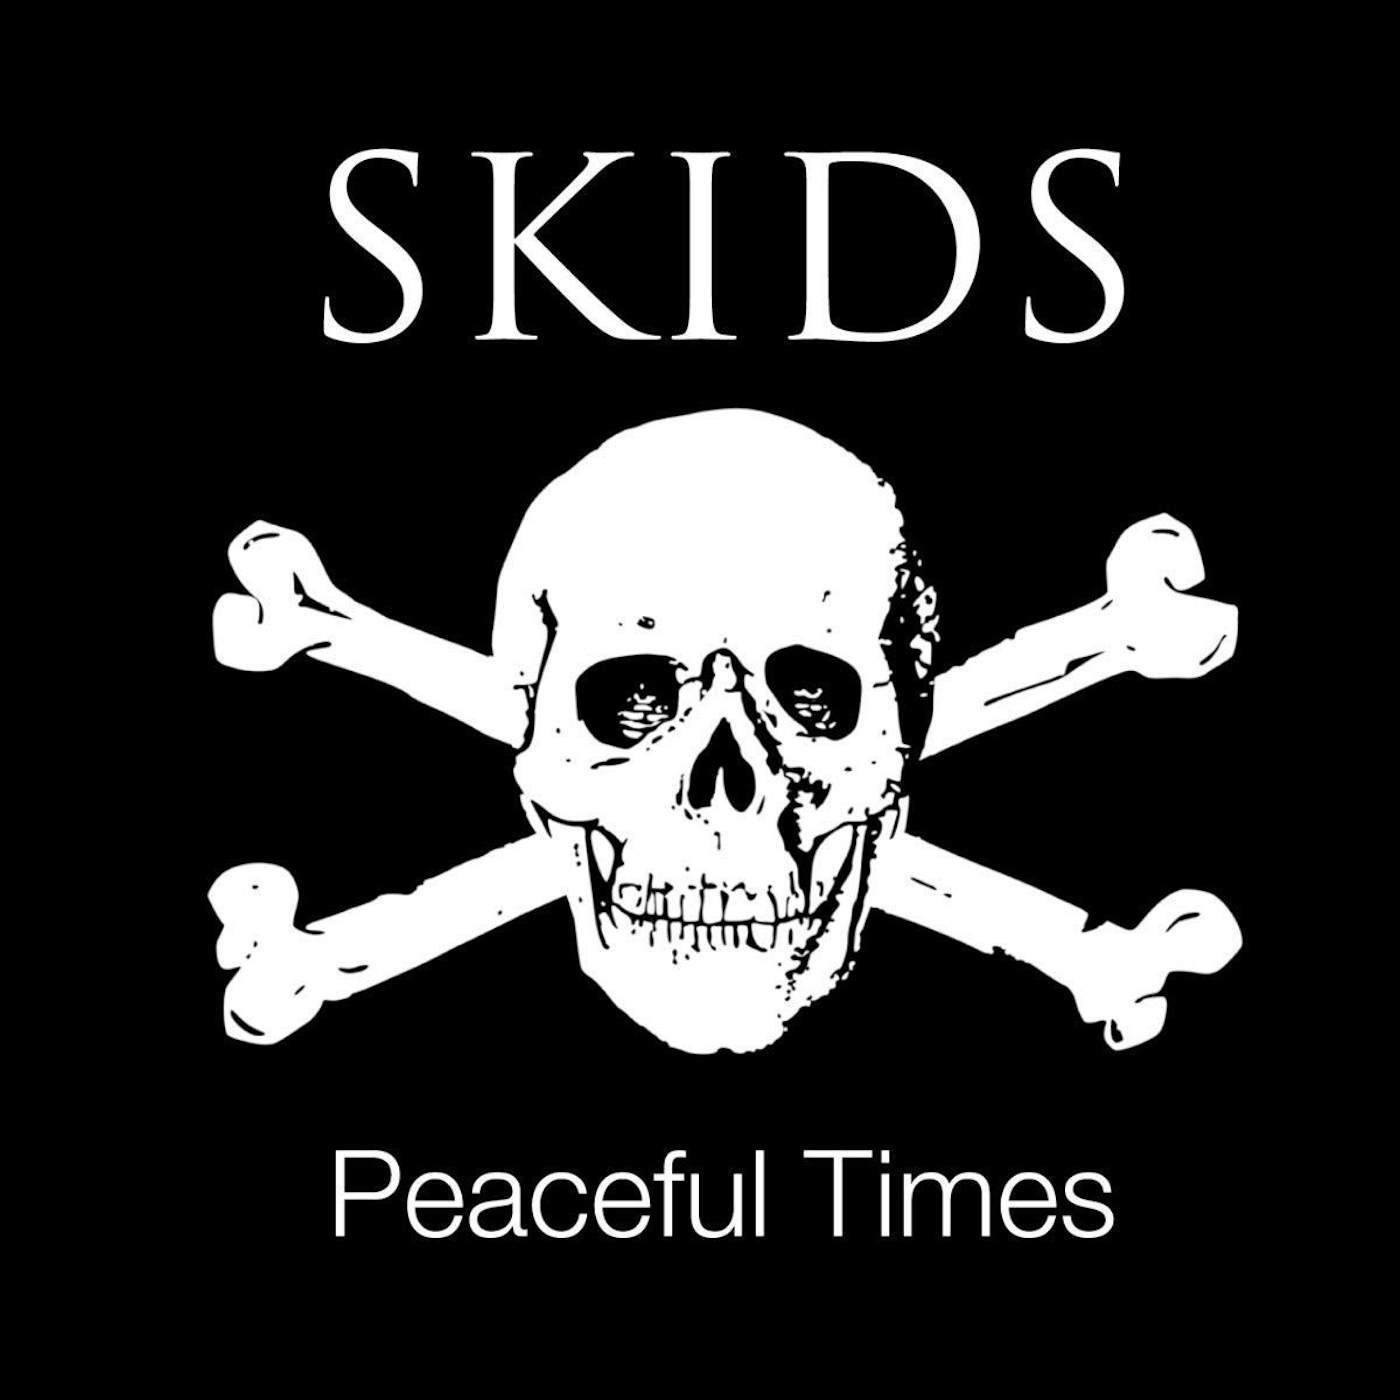 Skids Peaceful Times Vinyl Record